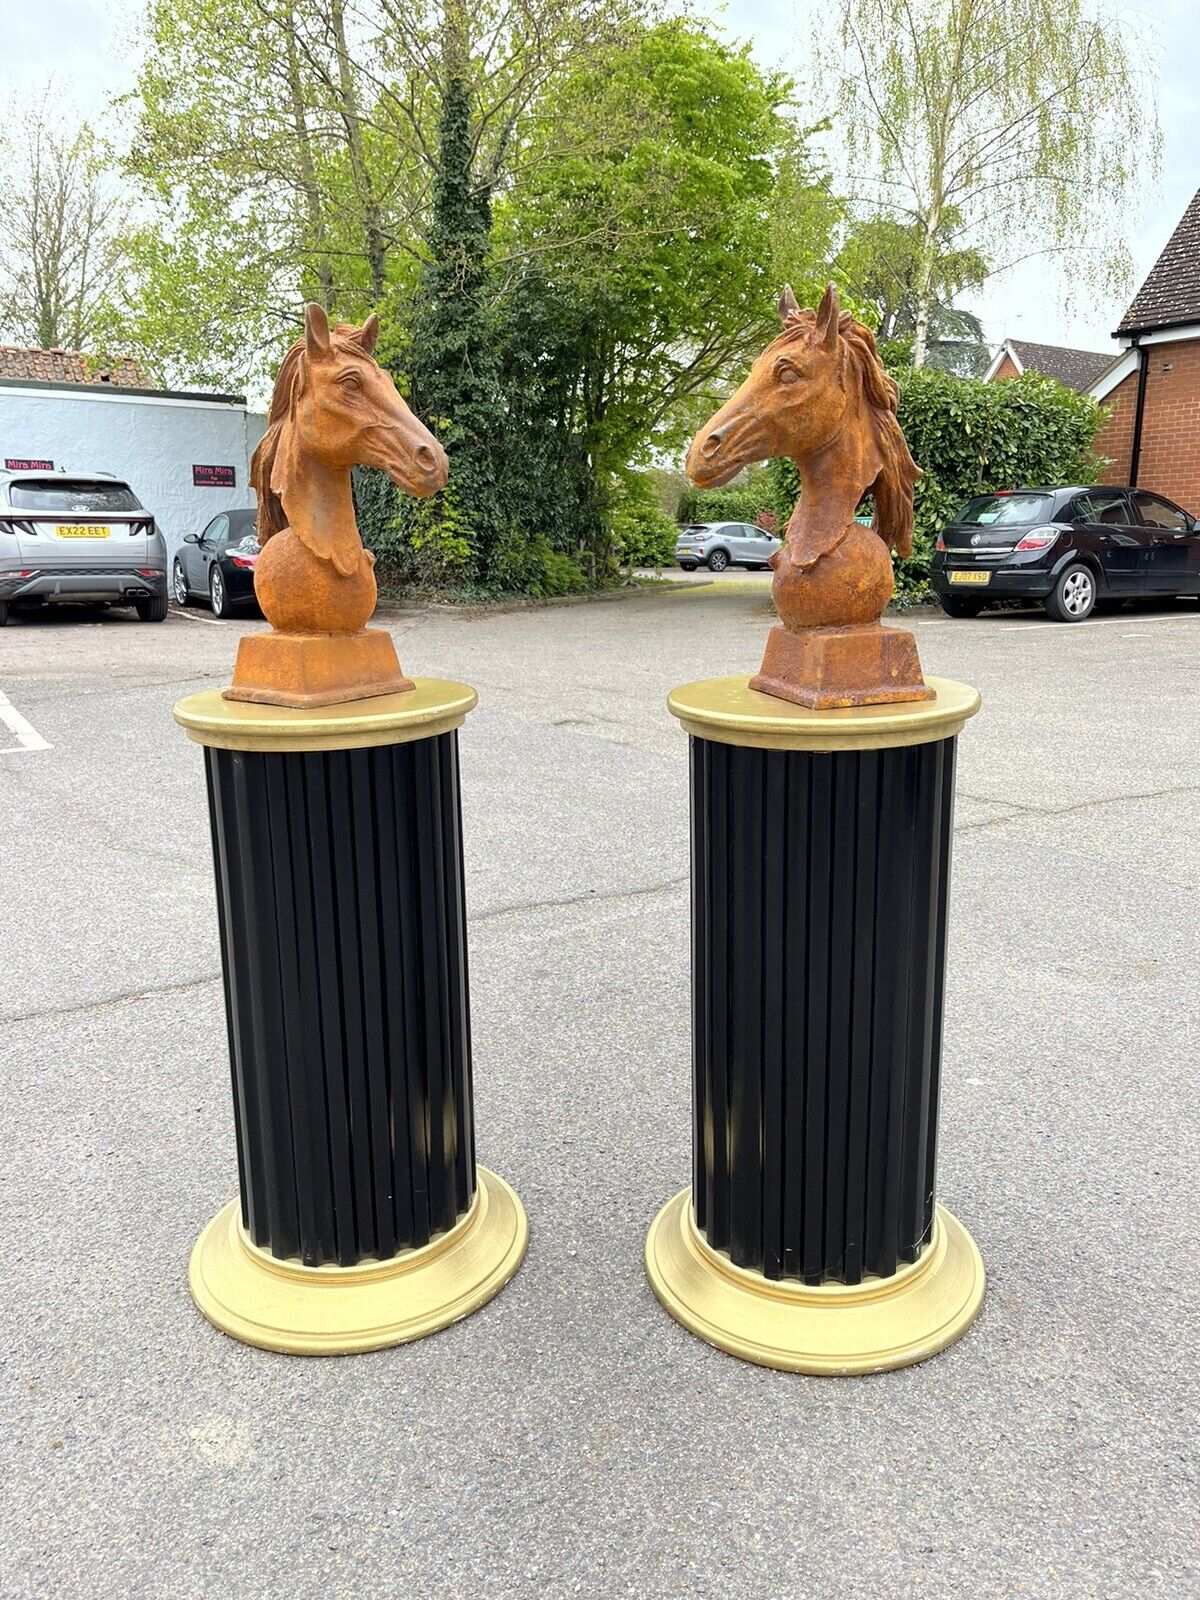 Pair Of Horse Head Statues, Cast Iron, Large In Size. With Corinthian Columns.